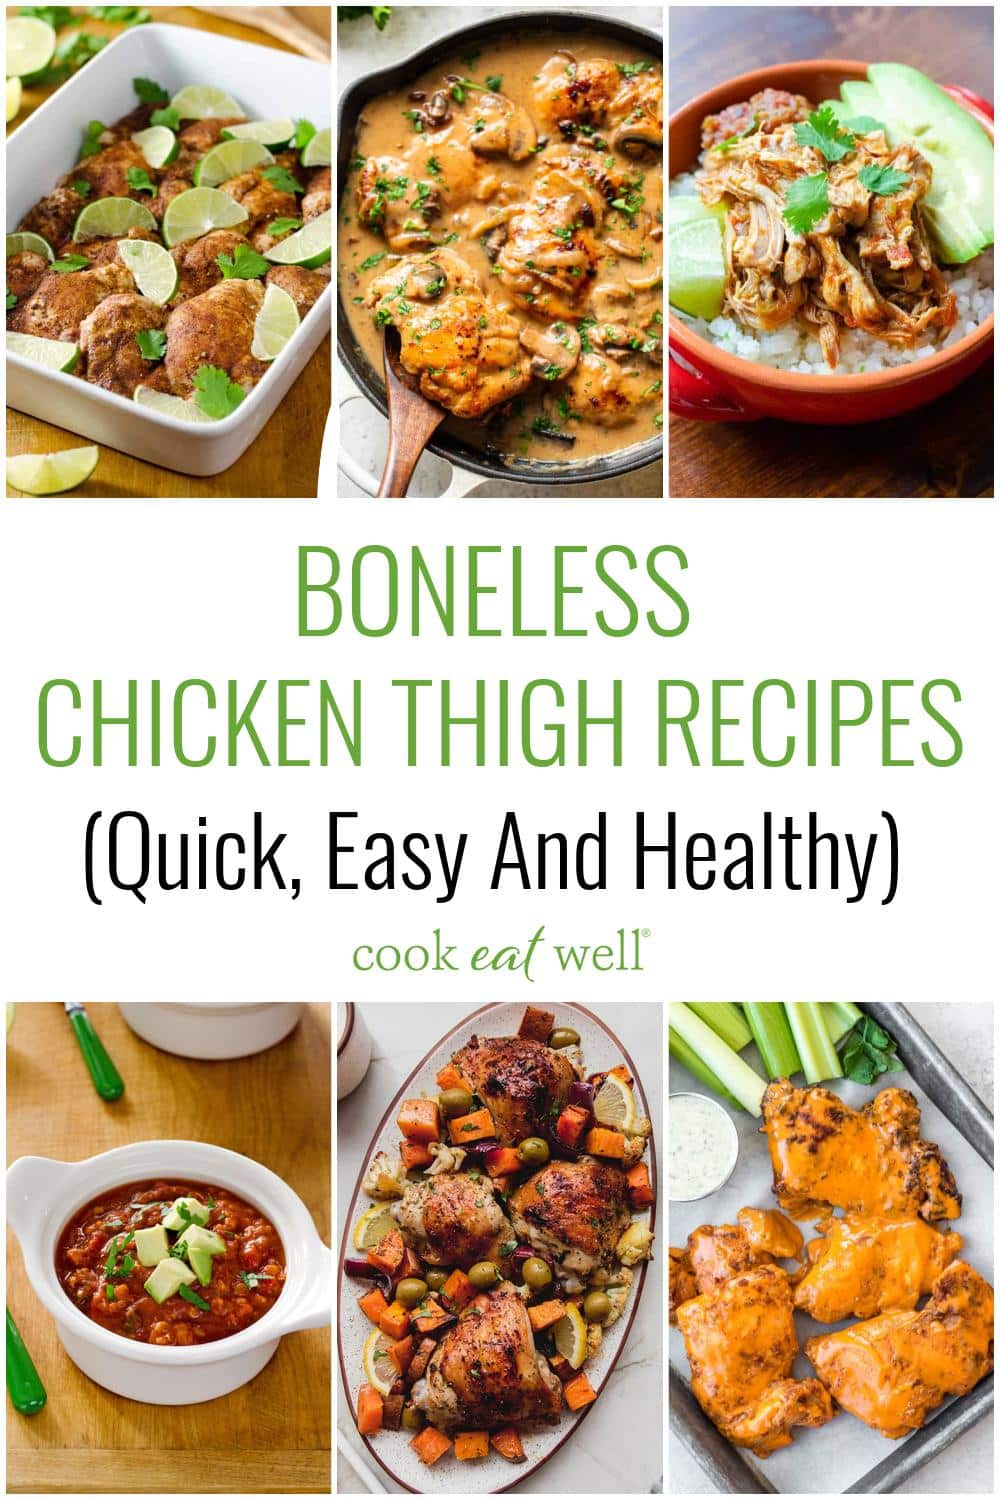 Boneless chicken thigh recipes (quick, easy and healthy)